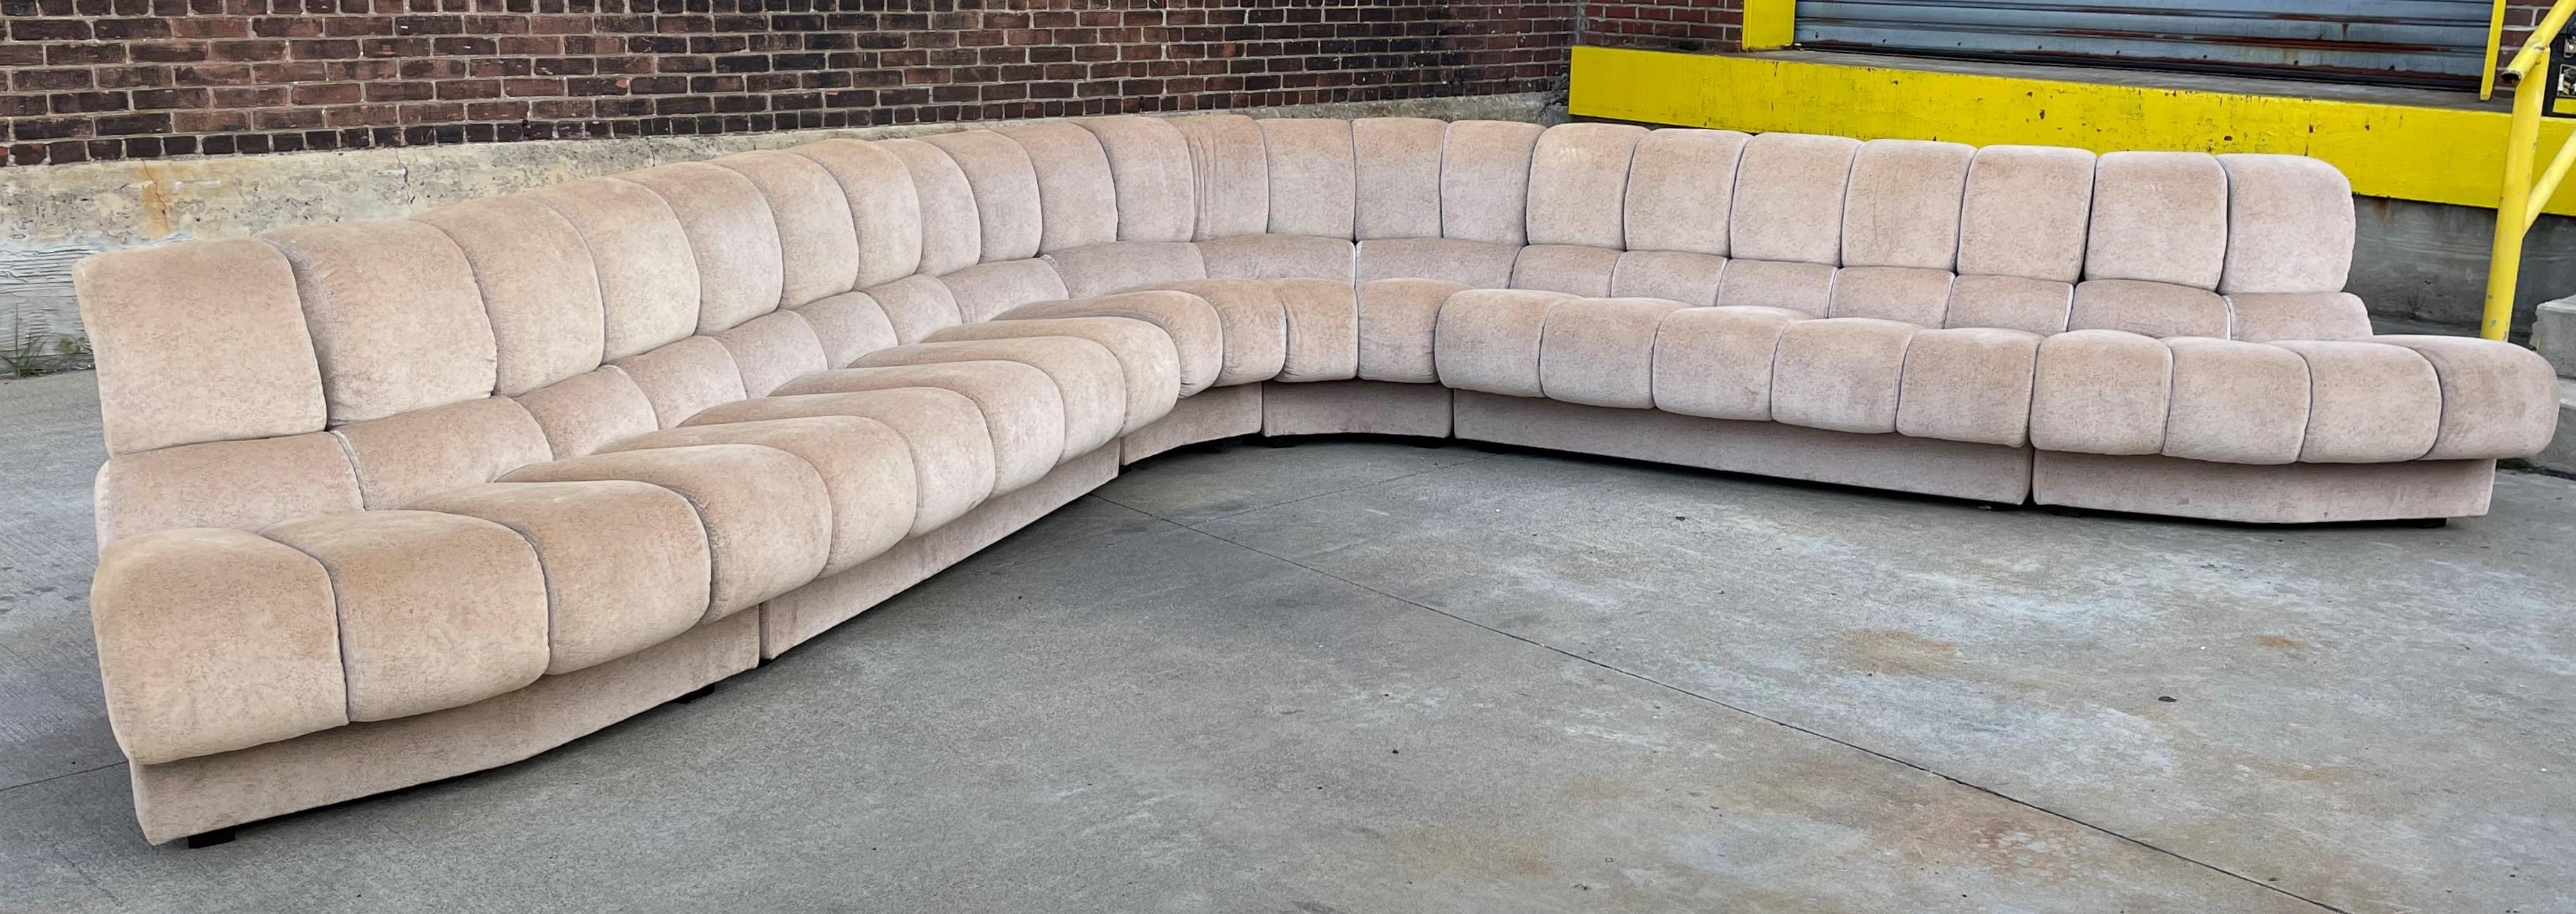 1960s 6 piece sectional sofa. This sectional sofa has the original fabric and wooden legs. The sofa is modular and can be arranged and several ways. This sofa is very comfortable.
Measures: 31